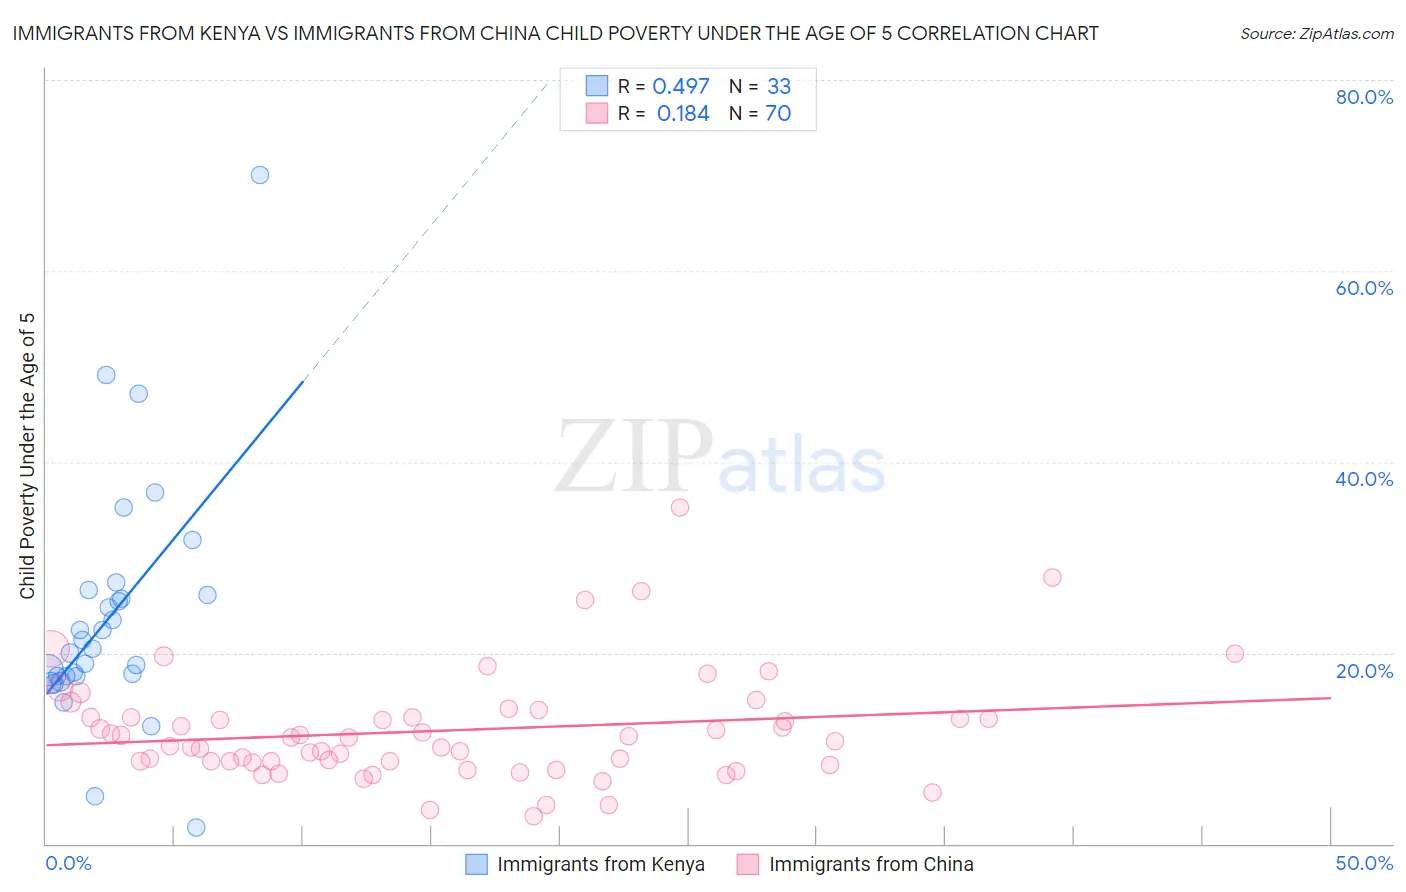 Immigrants from Kenya vs Immigrants from China Child Poverty Under the Age of 5